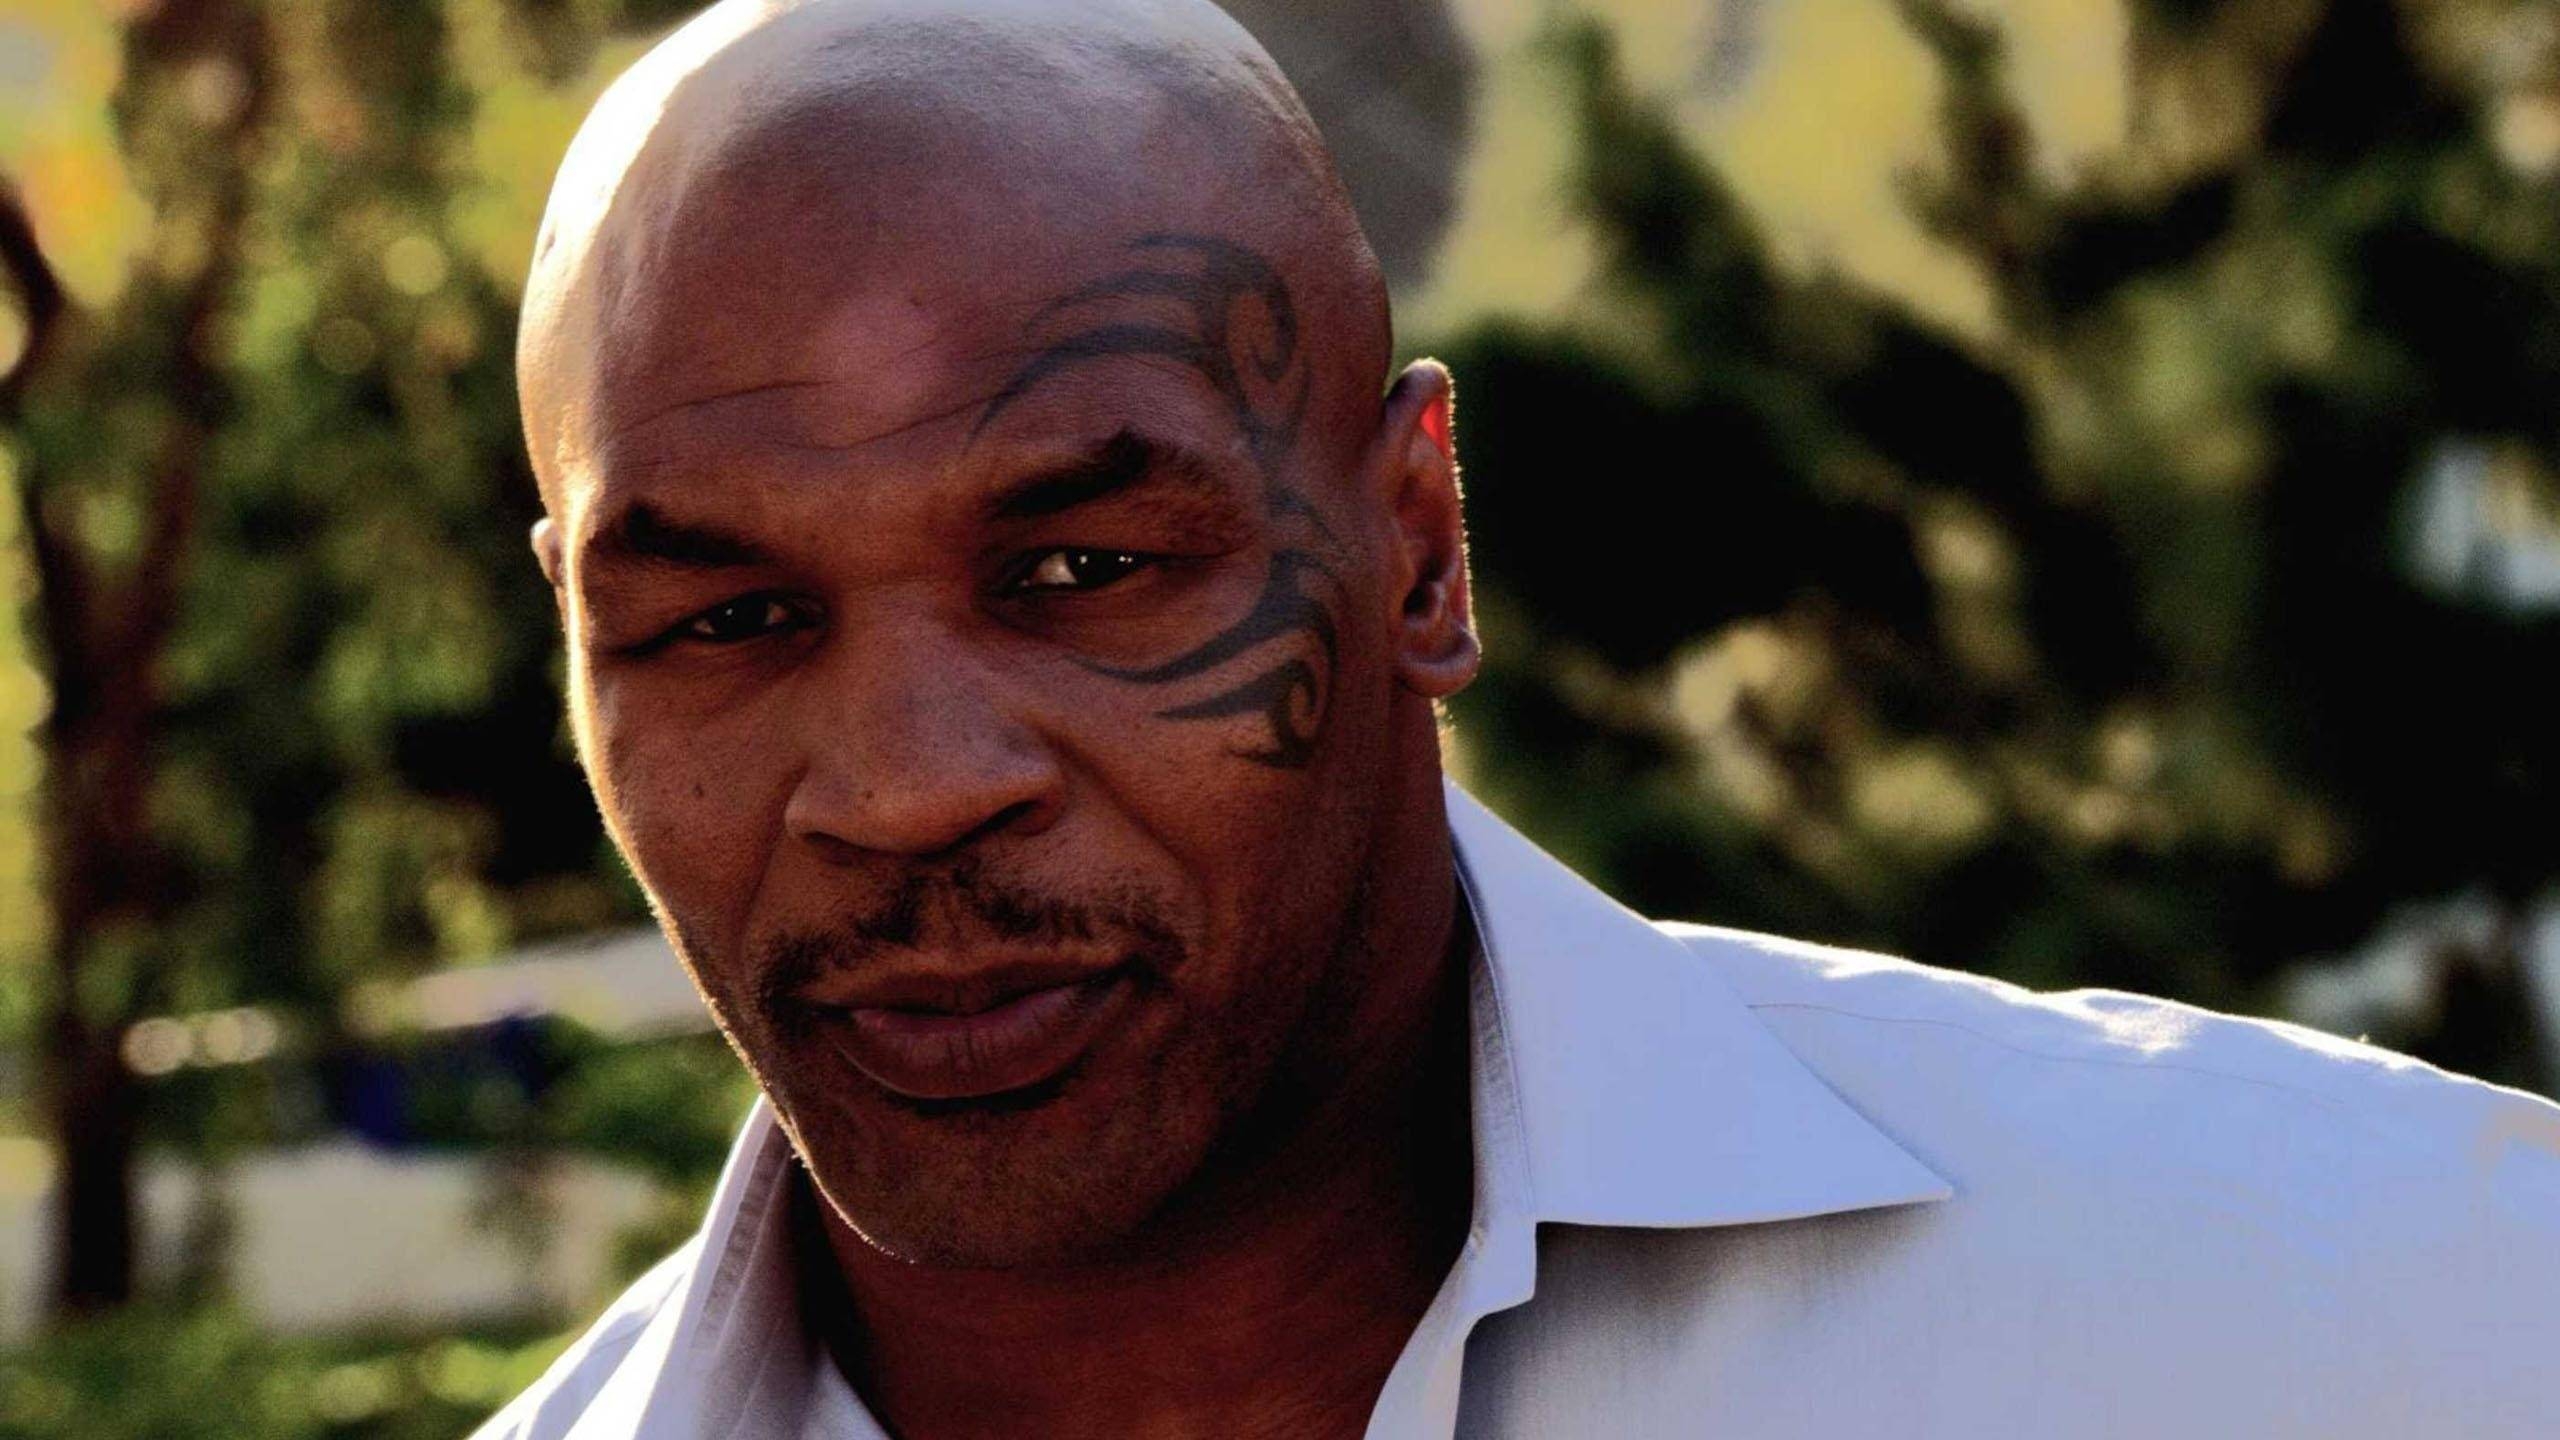 Mike Tyson Close-Up for 2560x1440 HDTV resolution